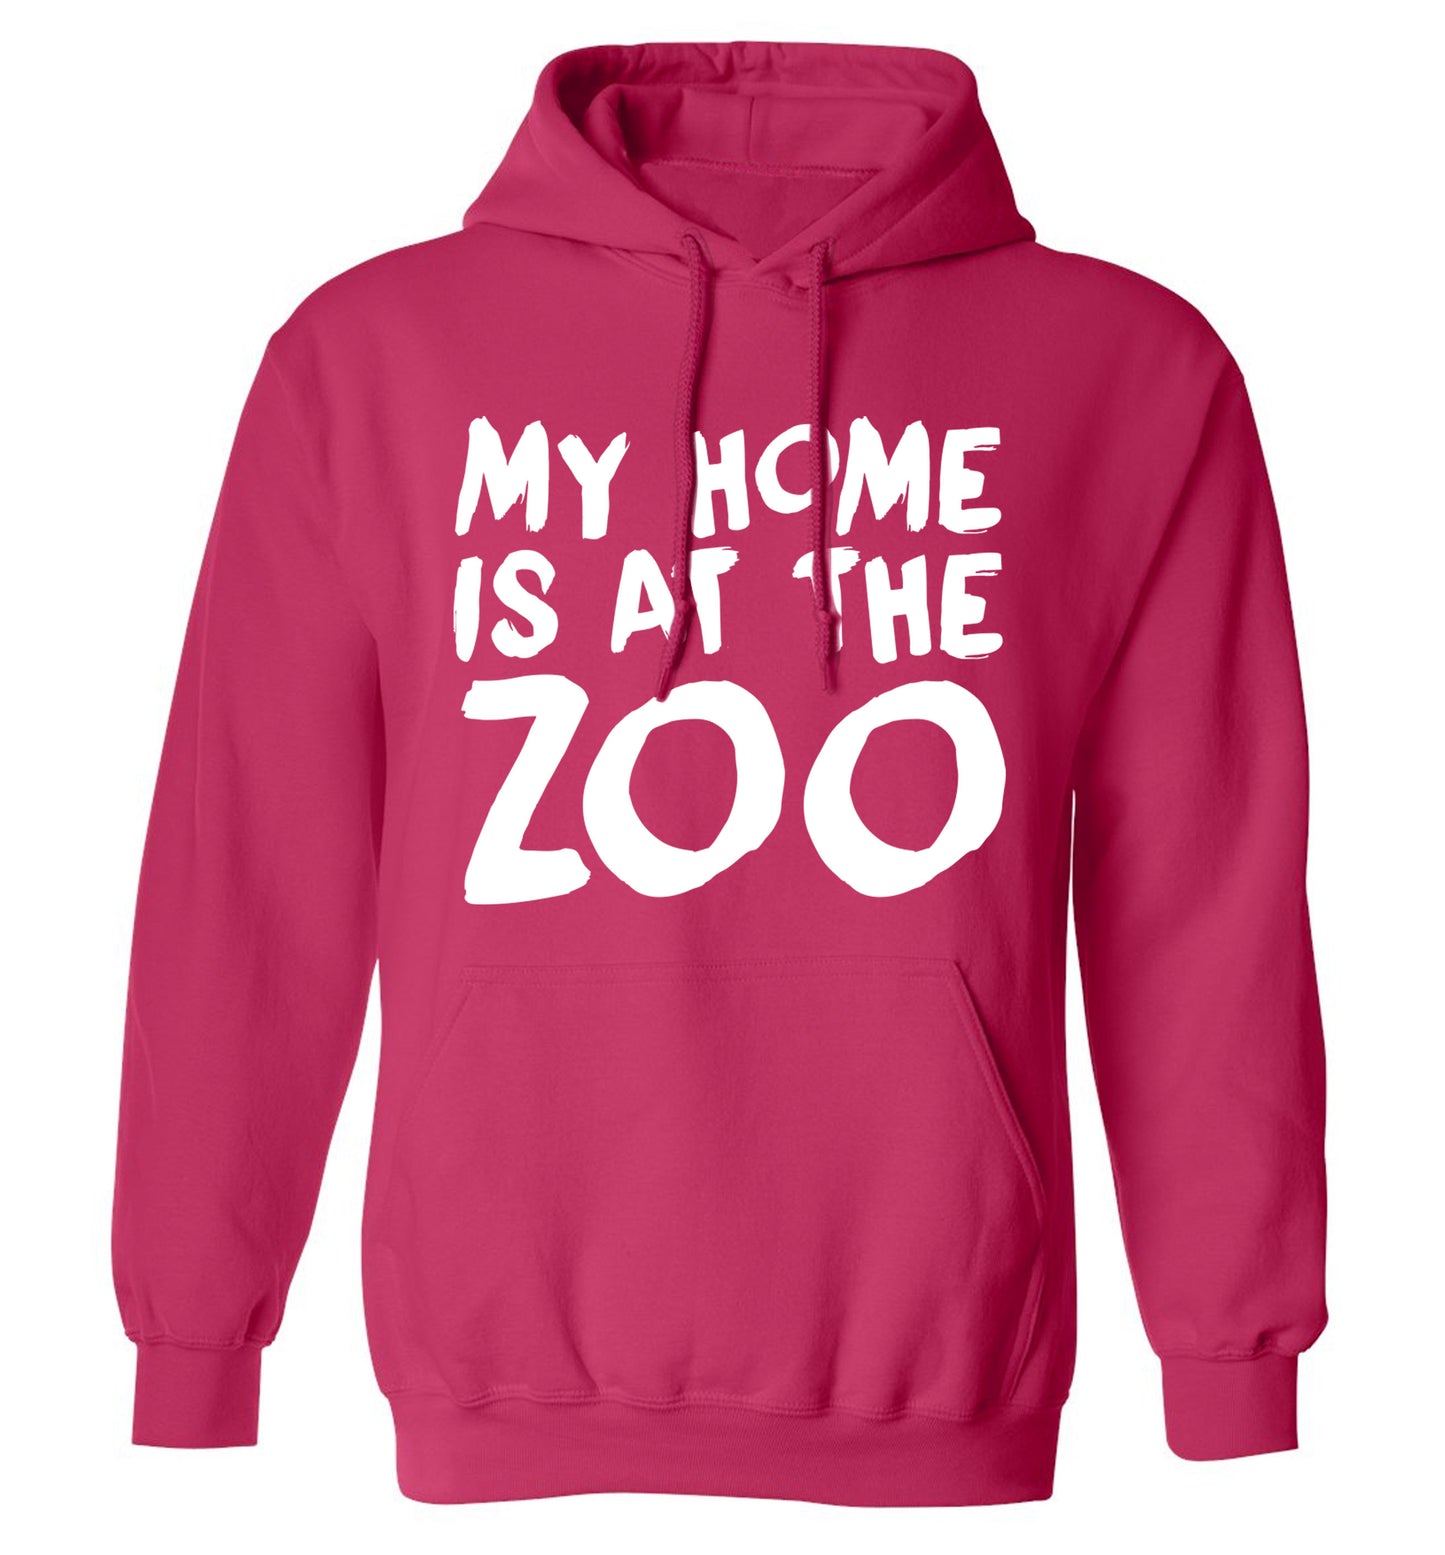 My home is at the zoo adults unisex pink hoodie 2XL